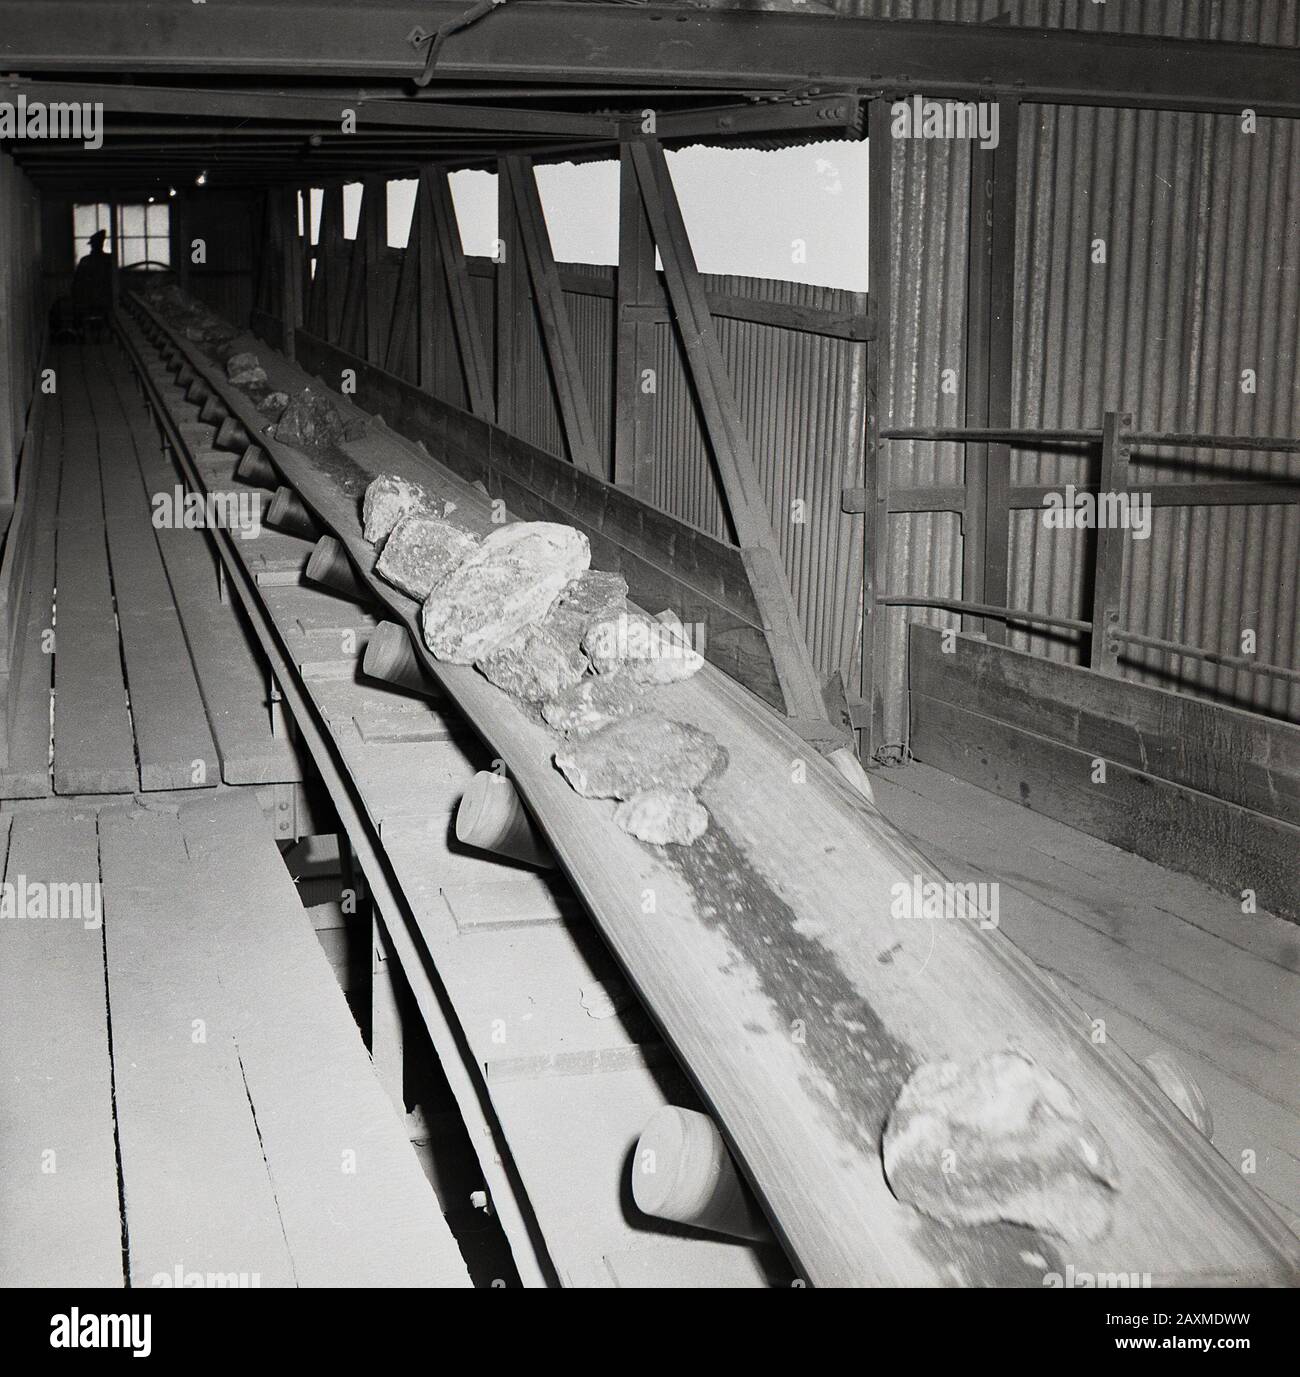 1960s, historical, covered conveyor belt in an open pit or mine carrying mined naturals minerals, rocks, which contain low concentrations of uranium ore, South Africa. Stock Photo